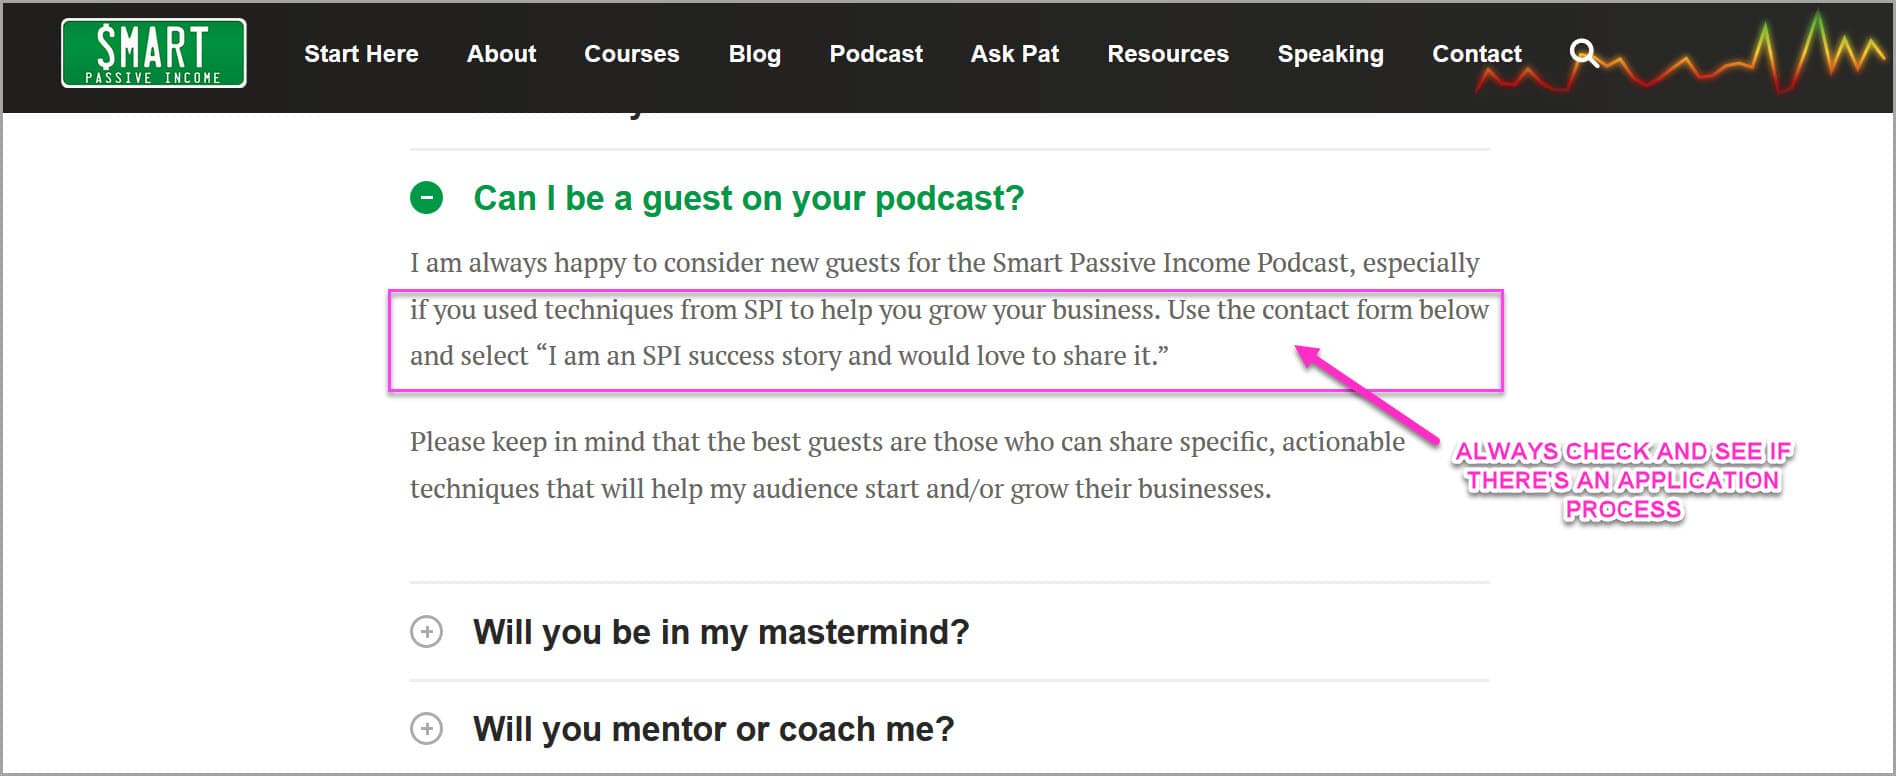 Have a quick search to see if they have a podcast guest submission section, or how to apply